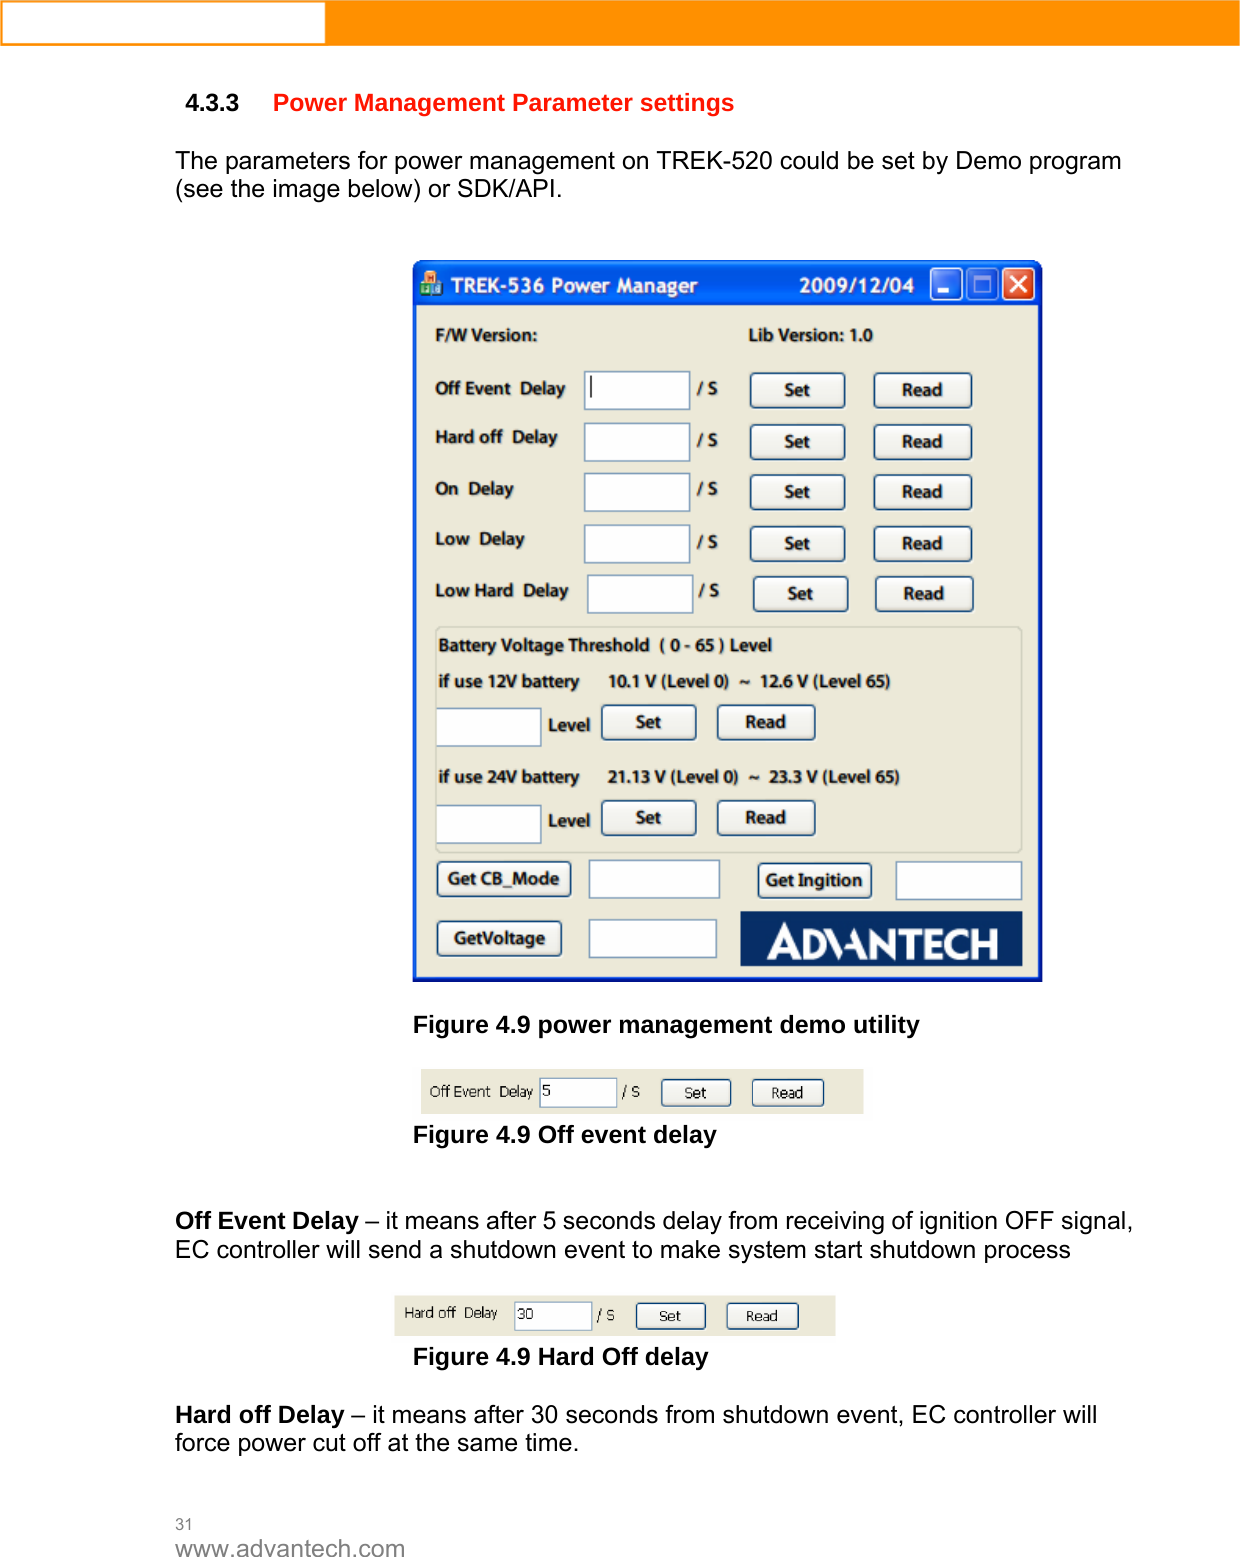  31 www.advantech.com  4.3.3 Power Management Parameter settings  The parameters for power management on TREK-520 could be set by Demo program (see the image below) or SDK/API.     Figure 4.9 power management demo utility   Figure 4.9 Off event delay   Off Event Delay – it means after 5 seconds delay from receiving of ignition OFF signal, EC controller will send a shutdown event to make system start shutdown process   Figure 4.9 Hard Off delay  Hard off Delay – it means after 30 seconds from shutdown event, EC controller will force power cut off at the same time.  